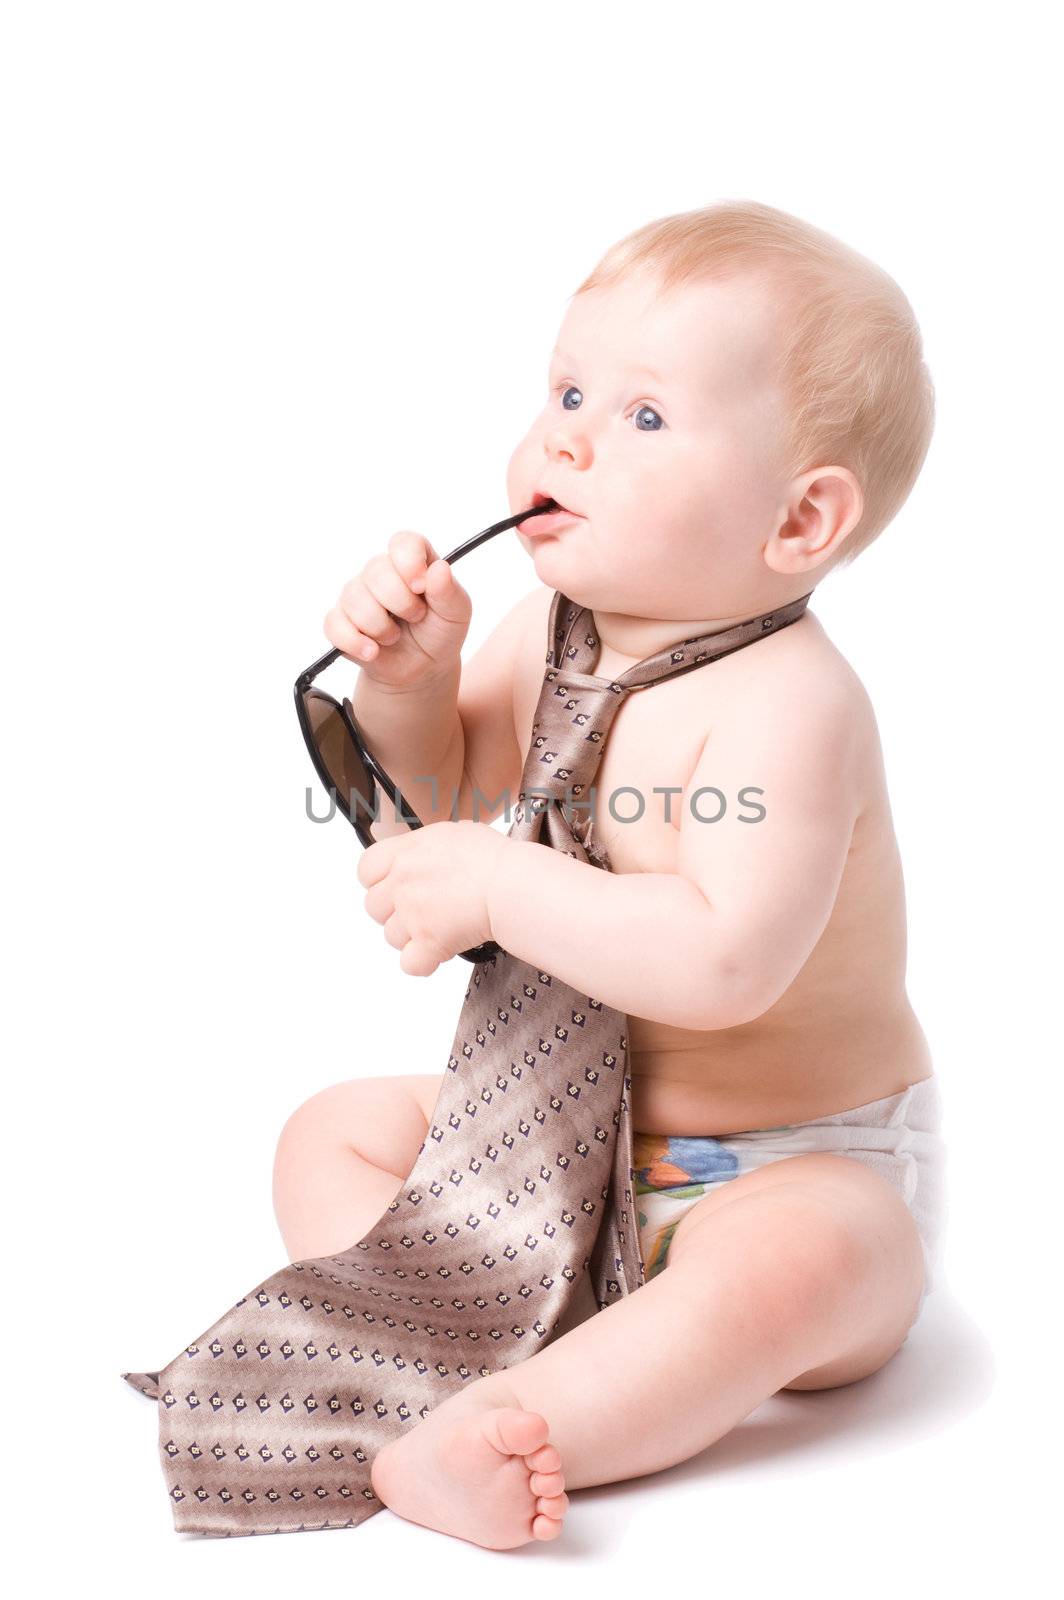 The small child in studio, on a white background